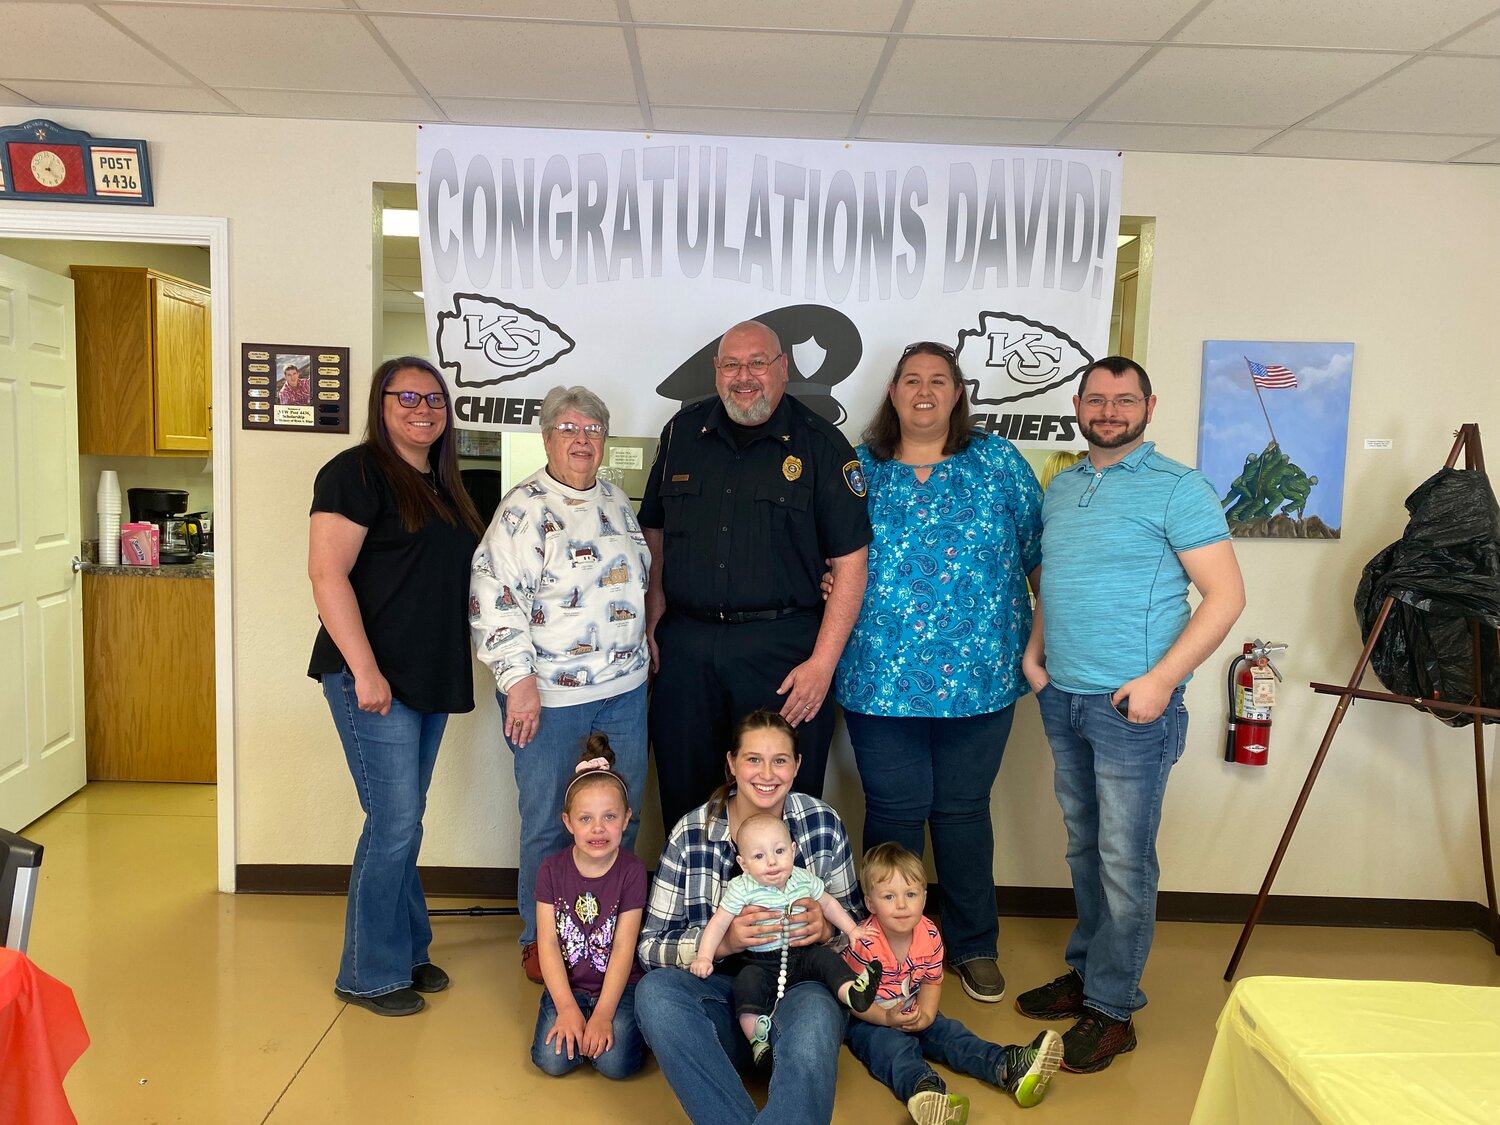 David Turner poses with his family during a staff and family luncheon. Turner retired as chief of the Montgomery City Police Department. Pictured are, front row from left, Gracie Dove (granddaughter), Samantha Turner (daughter), Emmett Turner (grandson) and Coltin Turner (grandson). Back row are Kimberlee Dove (daughter), Linda Turner (mother), David Turner, Lisa Turner (wife) and Kenneth Turner (son).